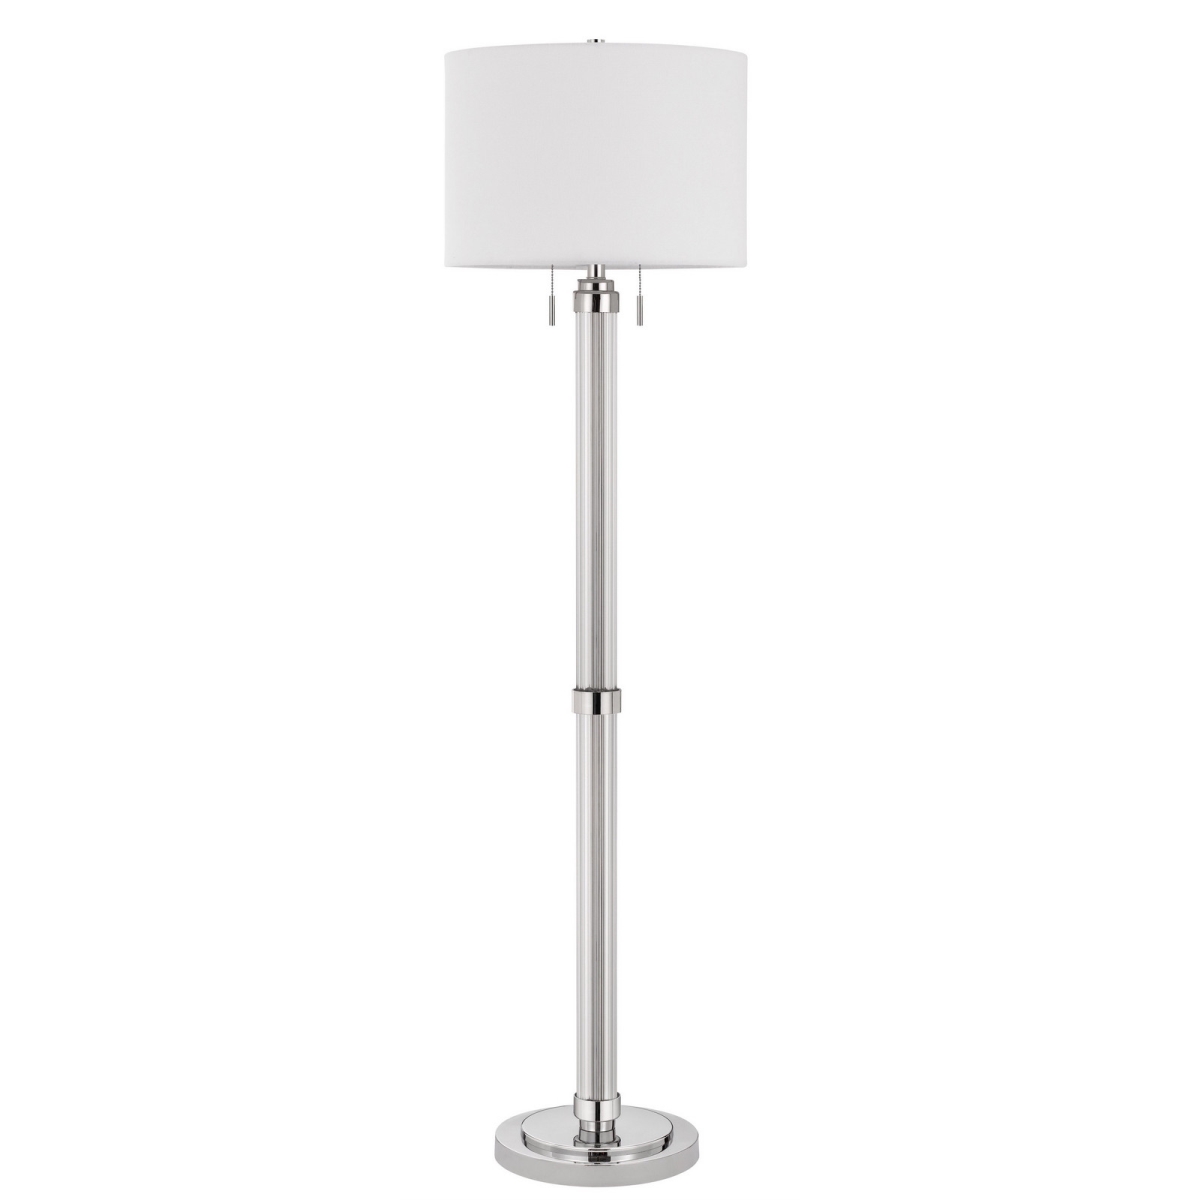 Estallar 60 in. Chrome Two Light Traditional Shaped Floor Lamp with White Rectangular Shade